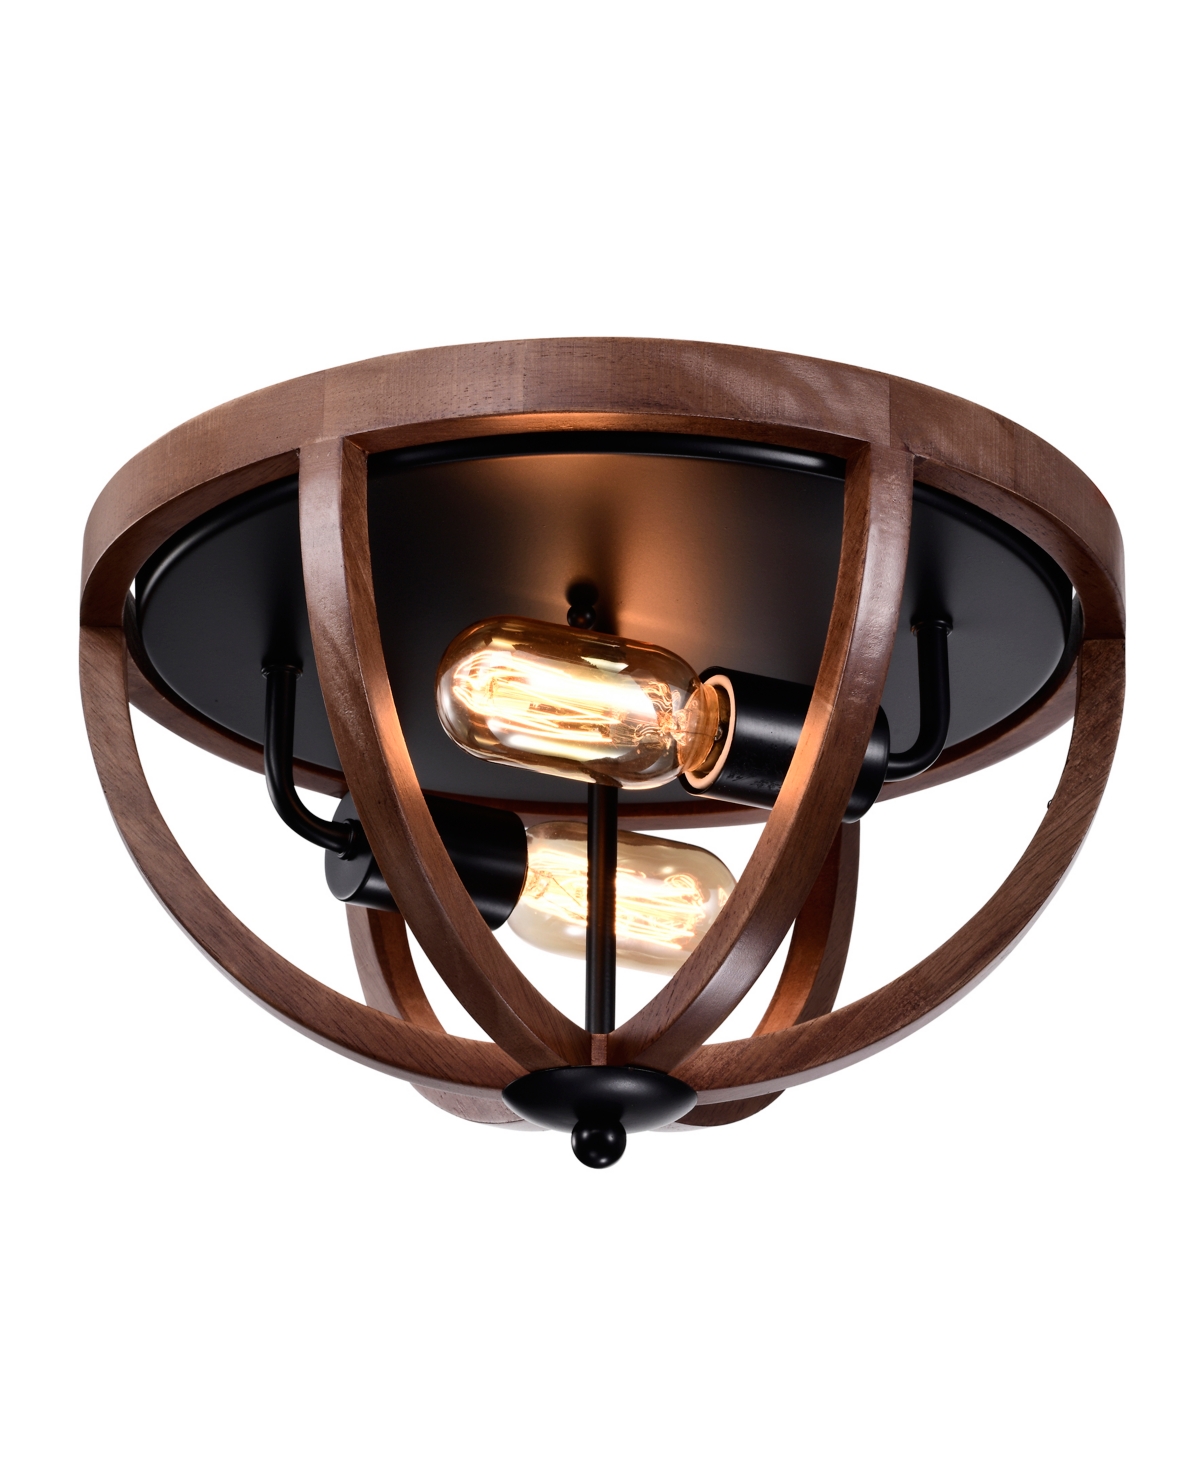 Home Accessories Fanalla 13" 2-light Indoor Flush Mount With Light Kit In Brown Faux Wood Grain